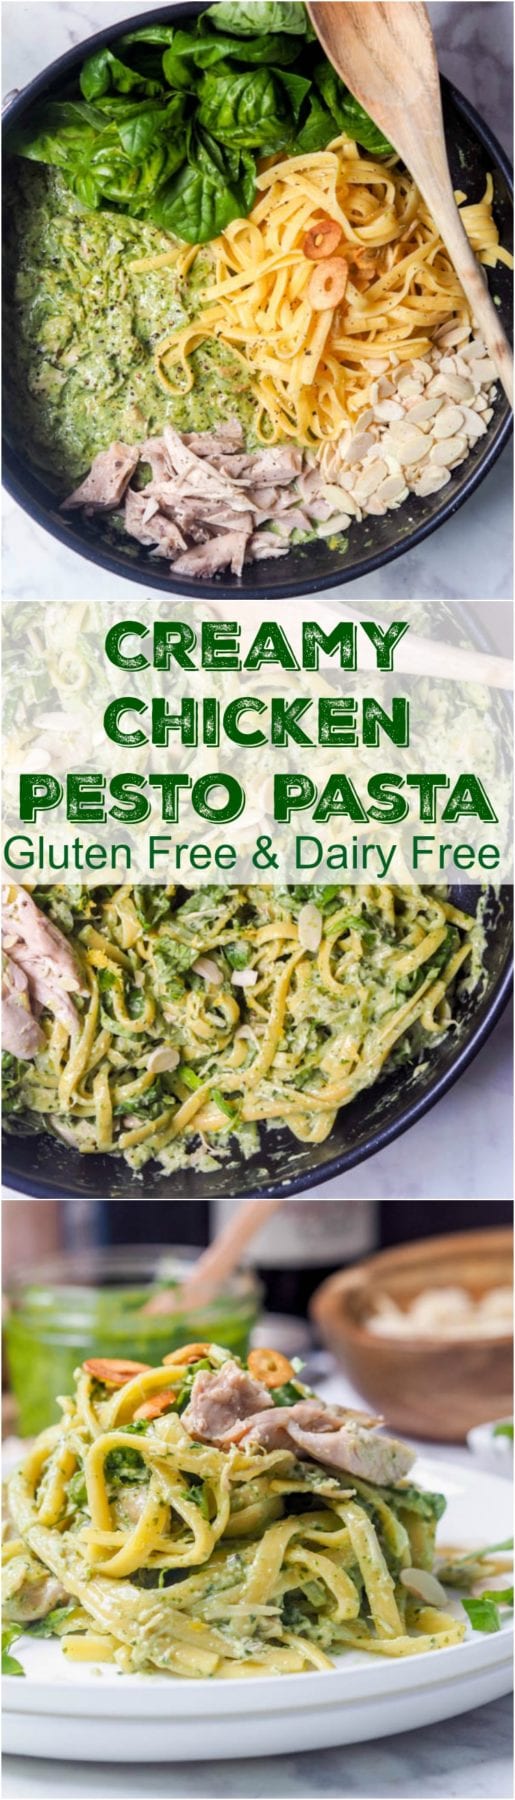 Pesto chicken pasta makes for the perfect quick 30 minute weeknight dinner. Dairy Free recipe with a creamy coconut milk based sauce plus extra flavors of toasted almonds, fried garlic chips and fresh herbs. Gluten-Free too. #pasta #pesto #chicken